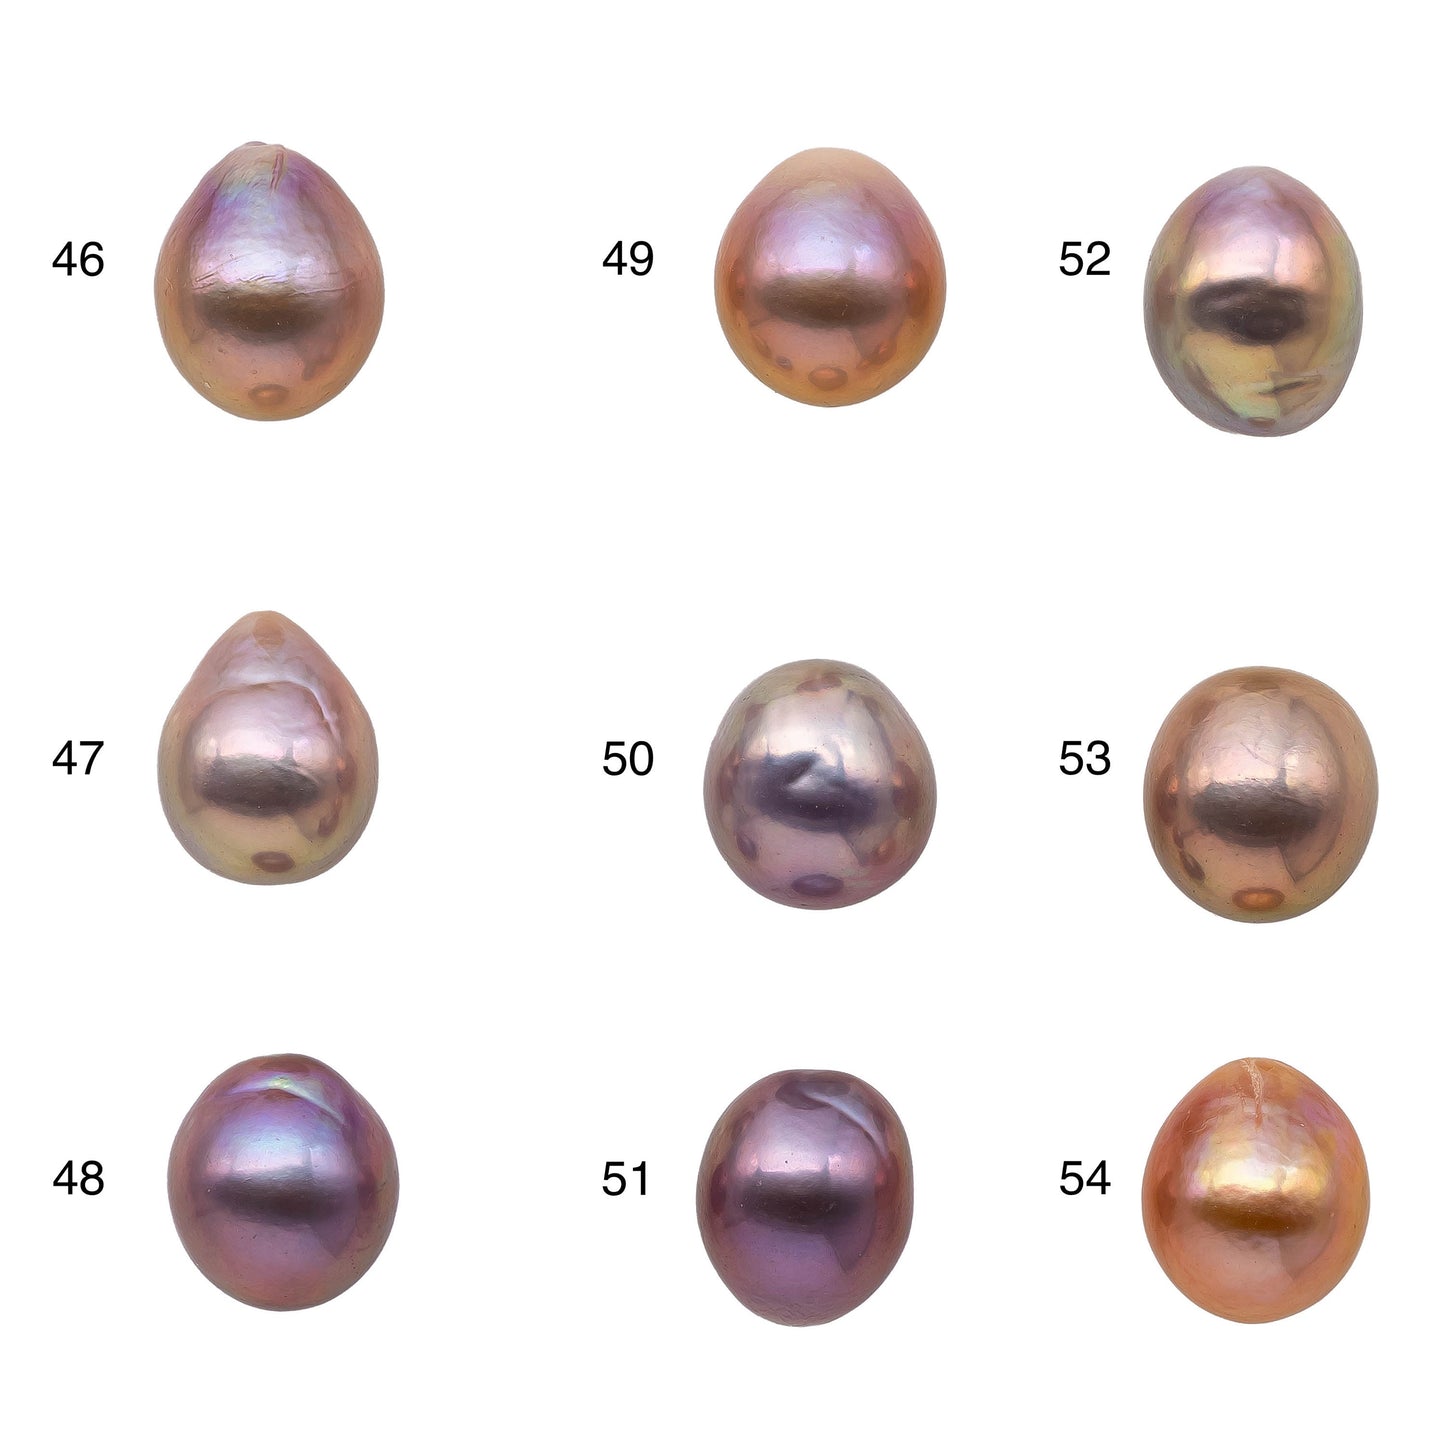 11-12mm One Piece Edison Pearl Tear Drops Loose Undrilled Natural Color with High Luster for Jewelry Making, SKU # 1167EP